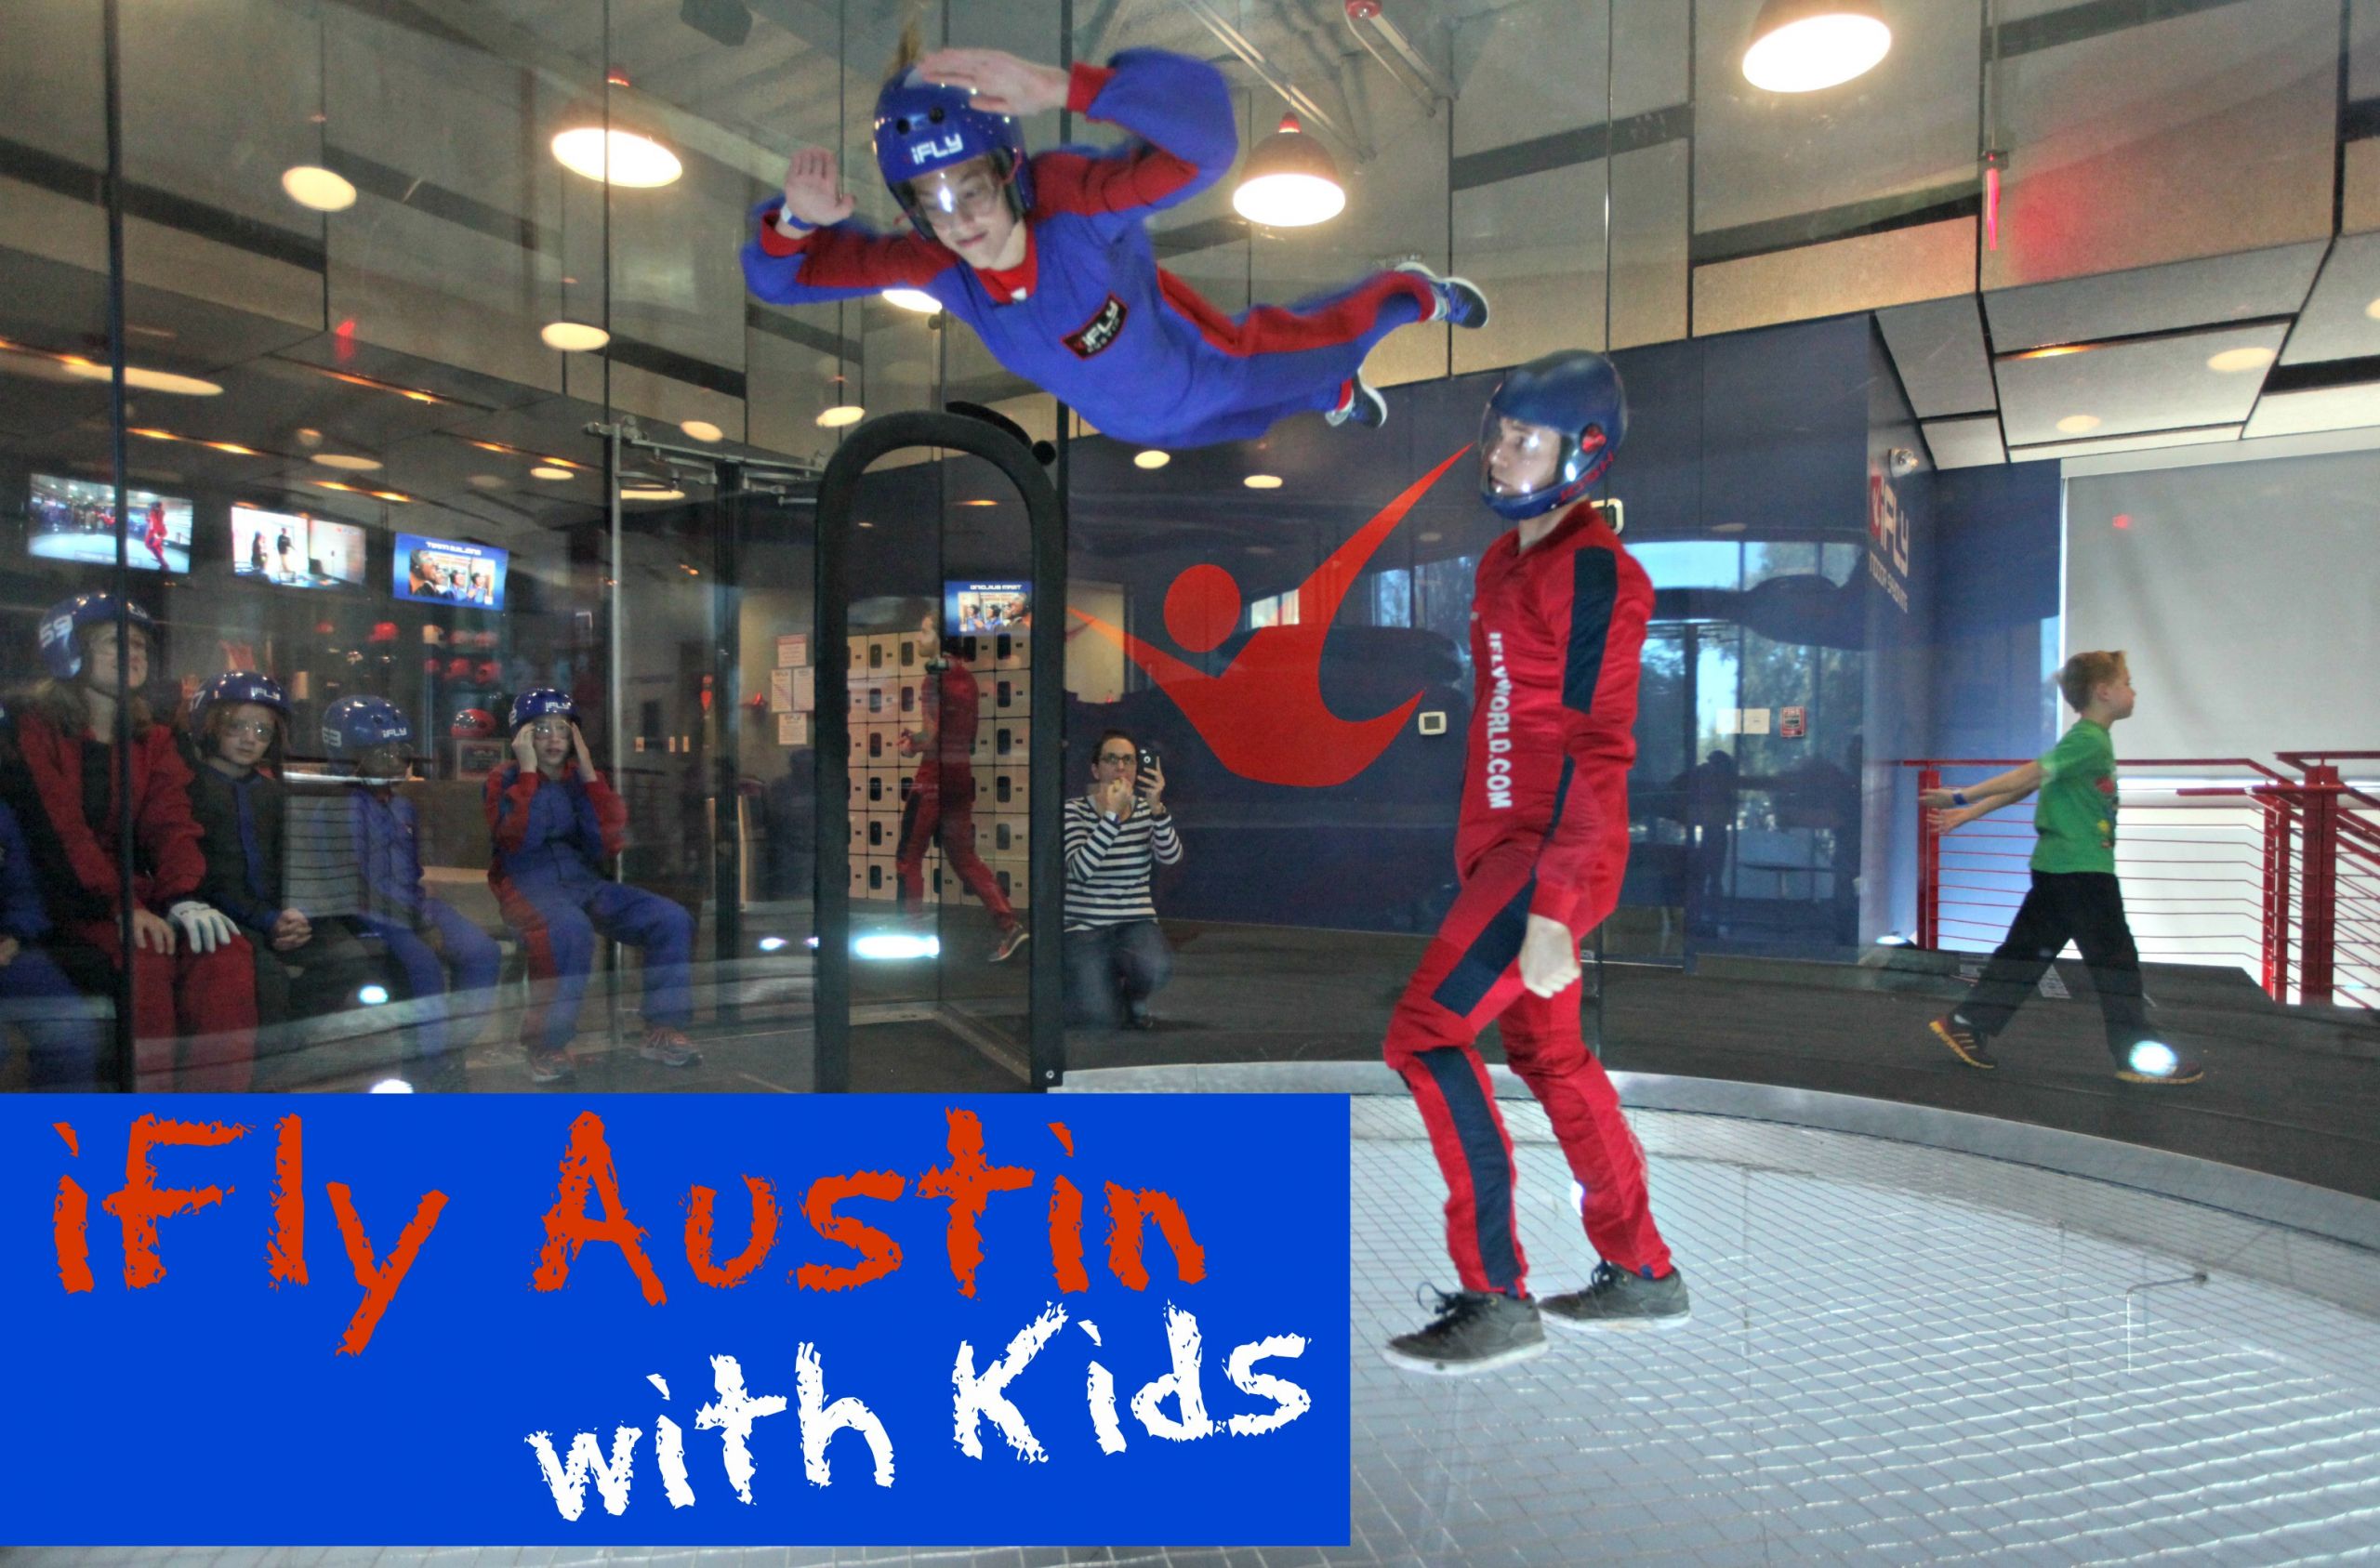 Indoor Skydiving For Kids
 iFly Austin Indoor Skydiving with Kids